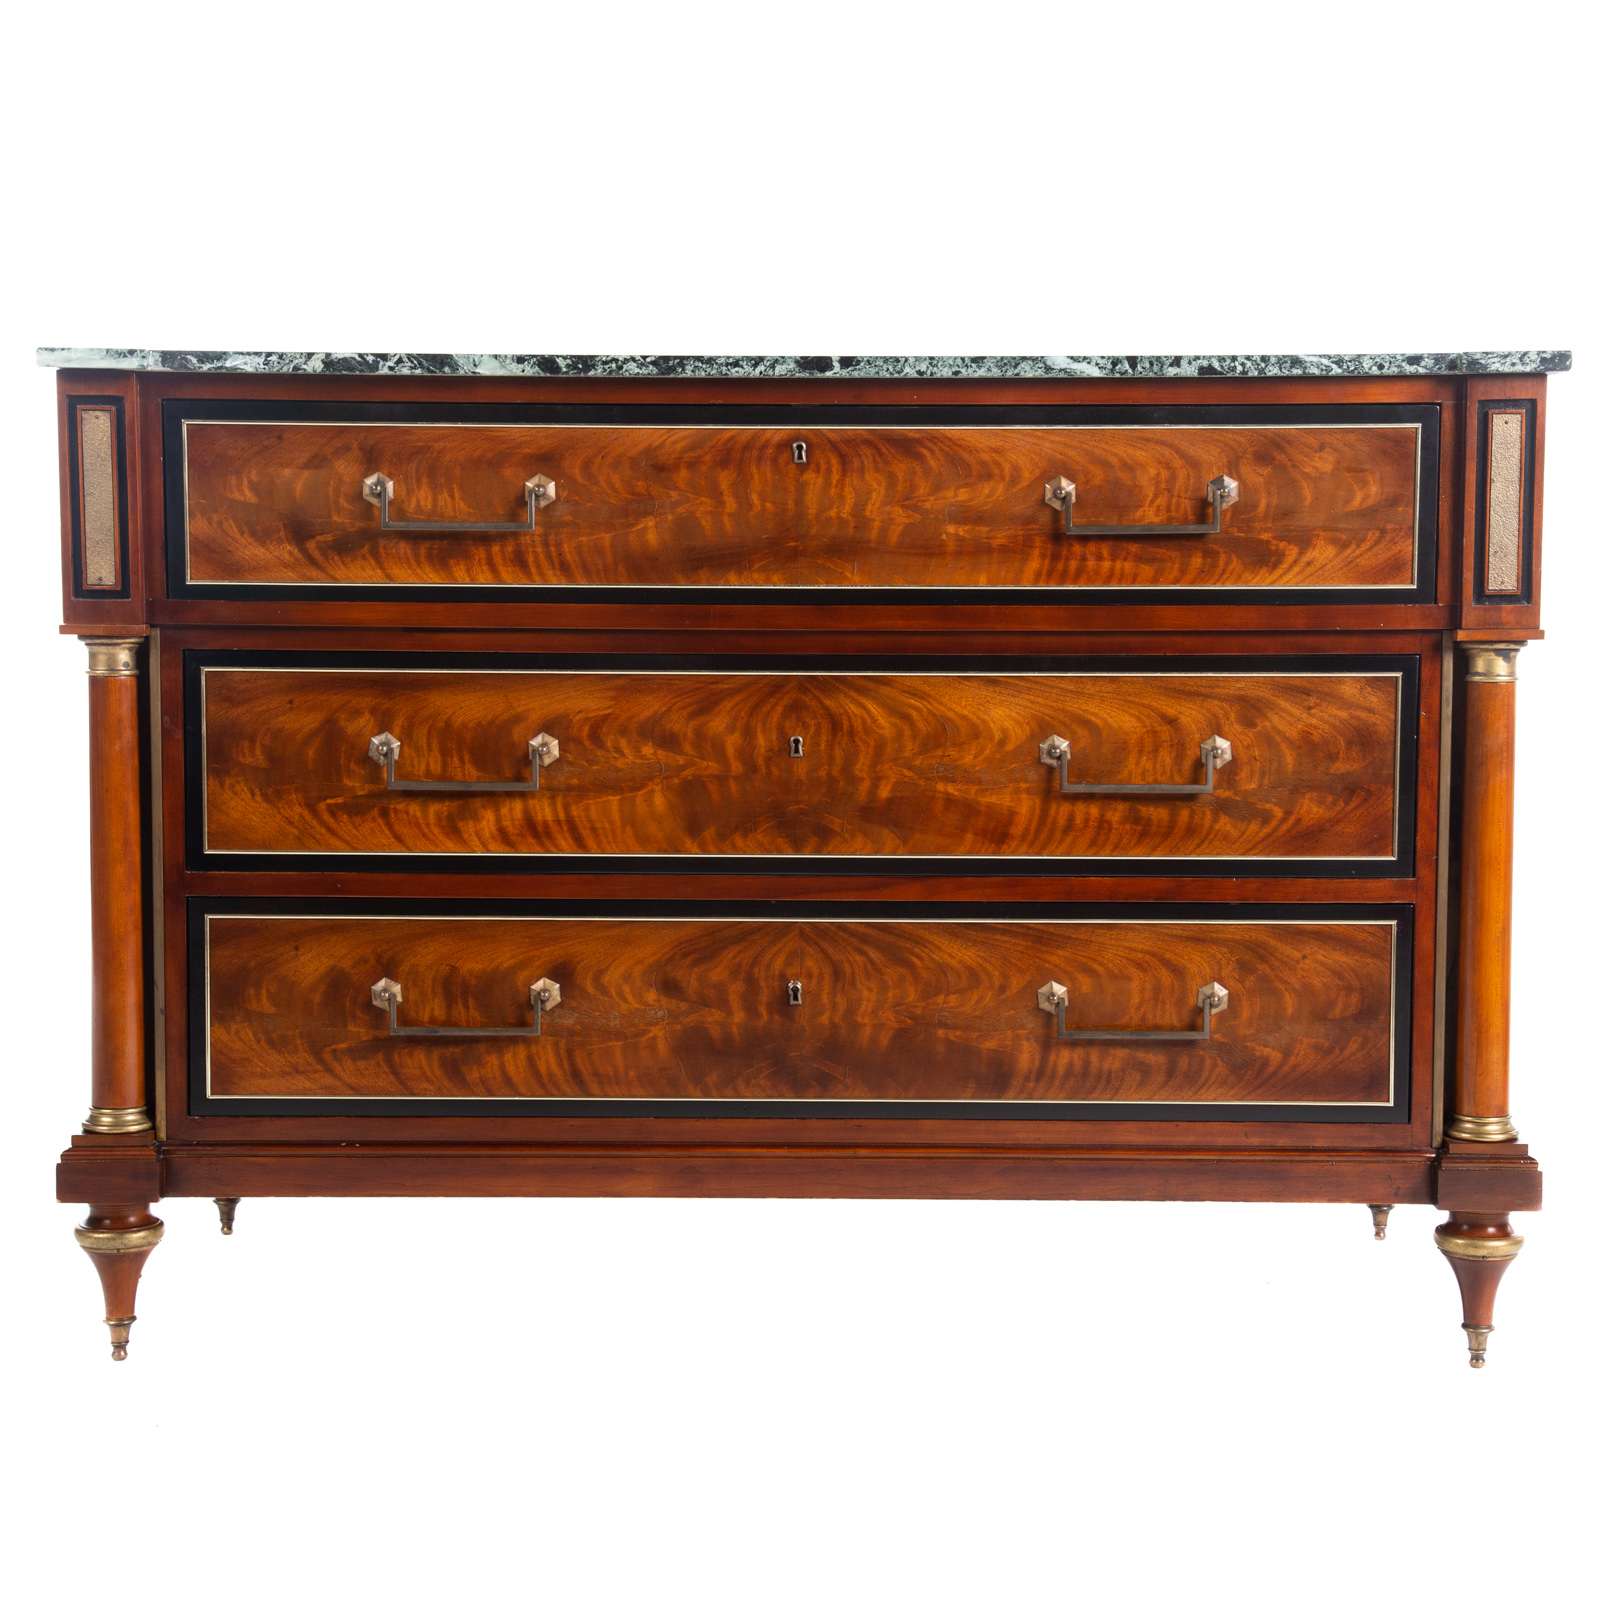 NEOCLASSICAL STYLE MARBLE TOP COMMODE 369a09